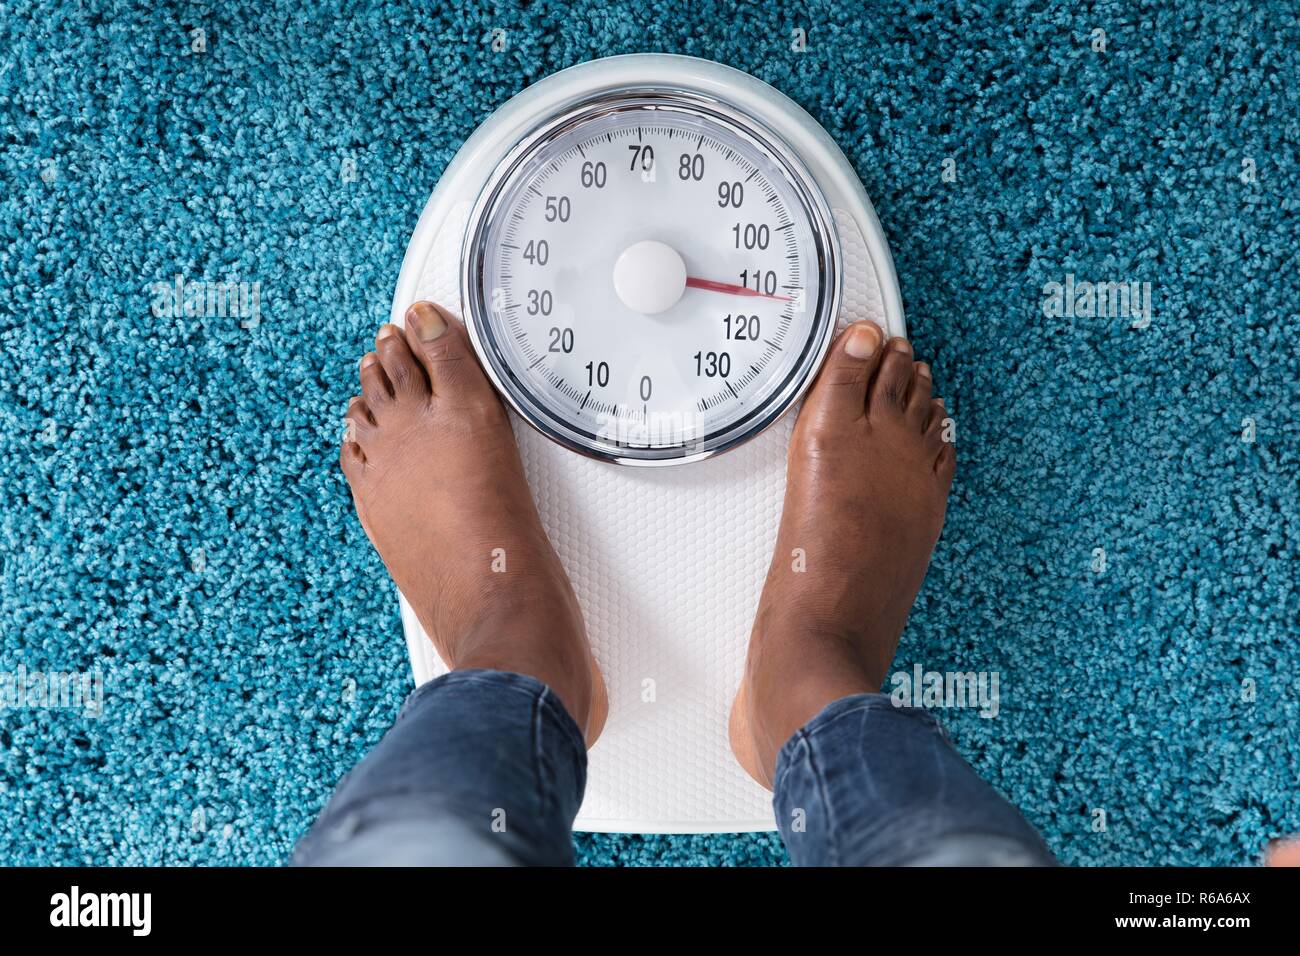 https://c8.alamy.com/comp/R6A6AX/human-foot-on-weighing-scale-R6A6AX.jpg